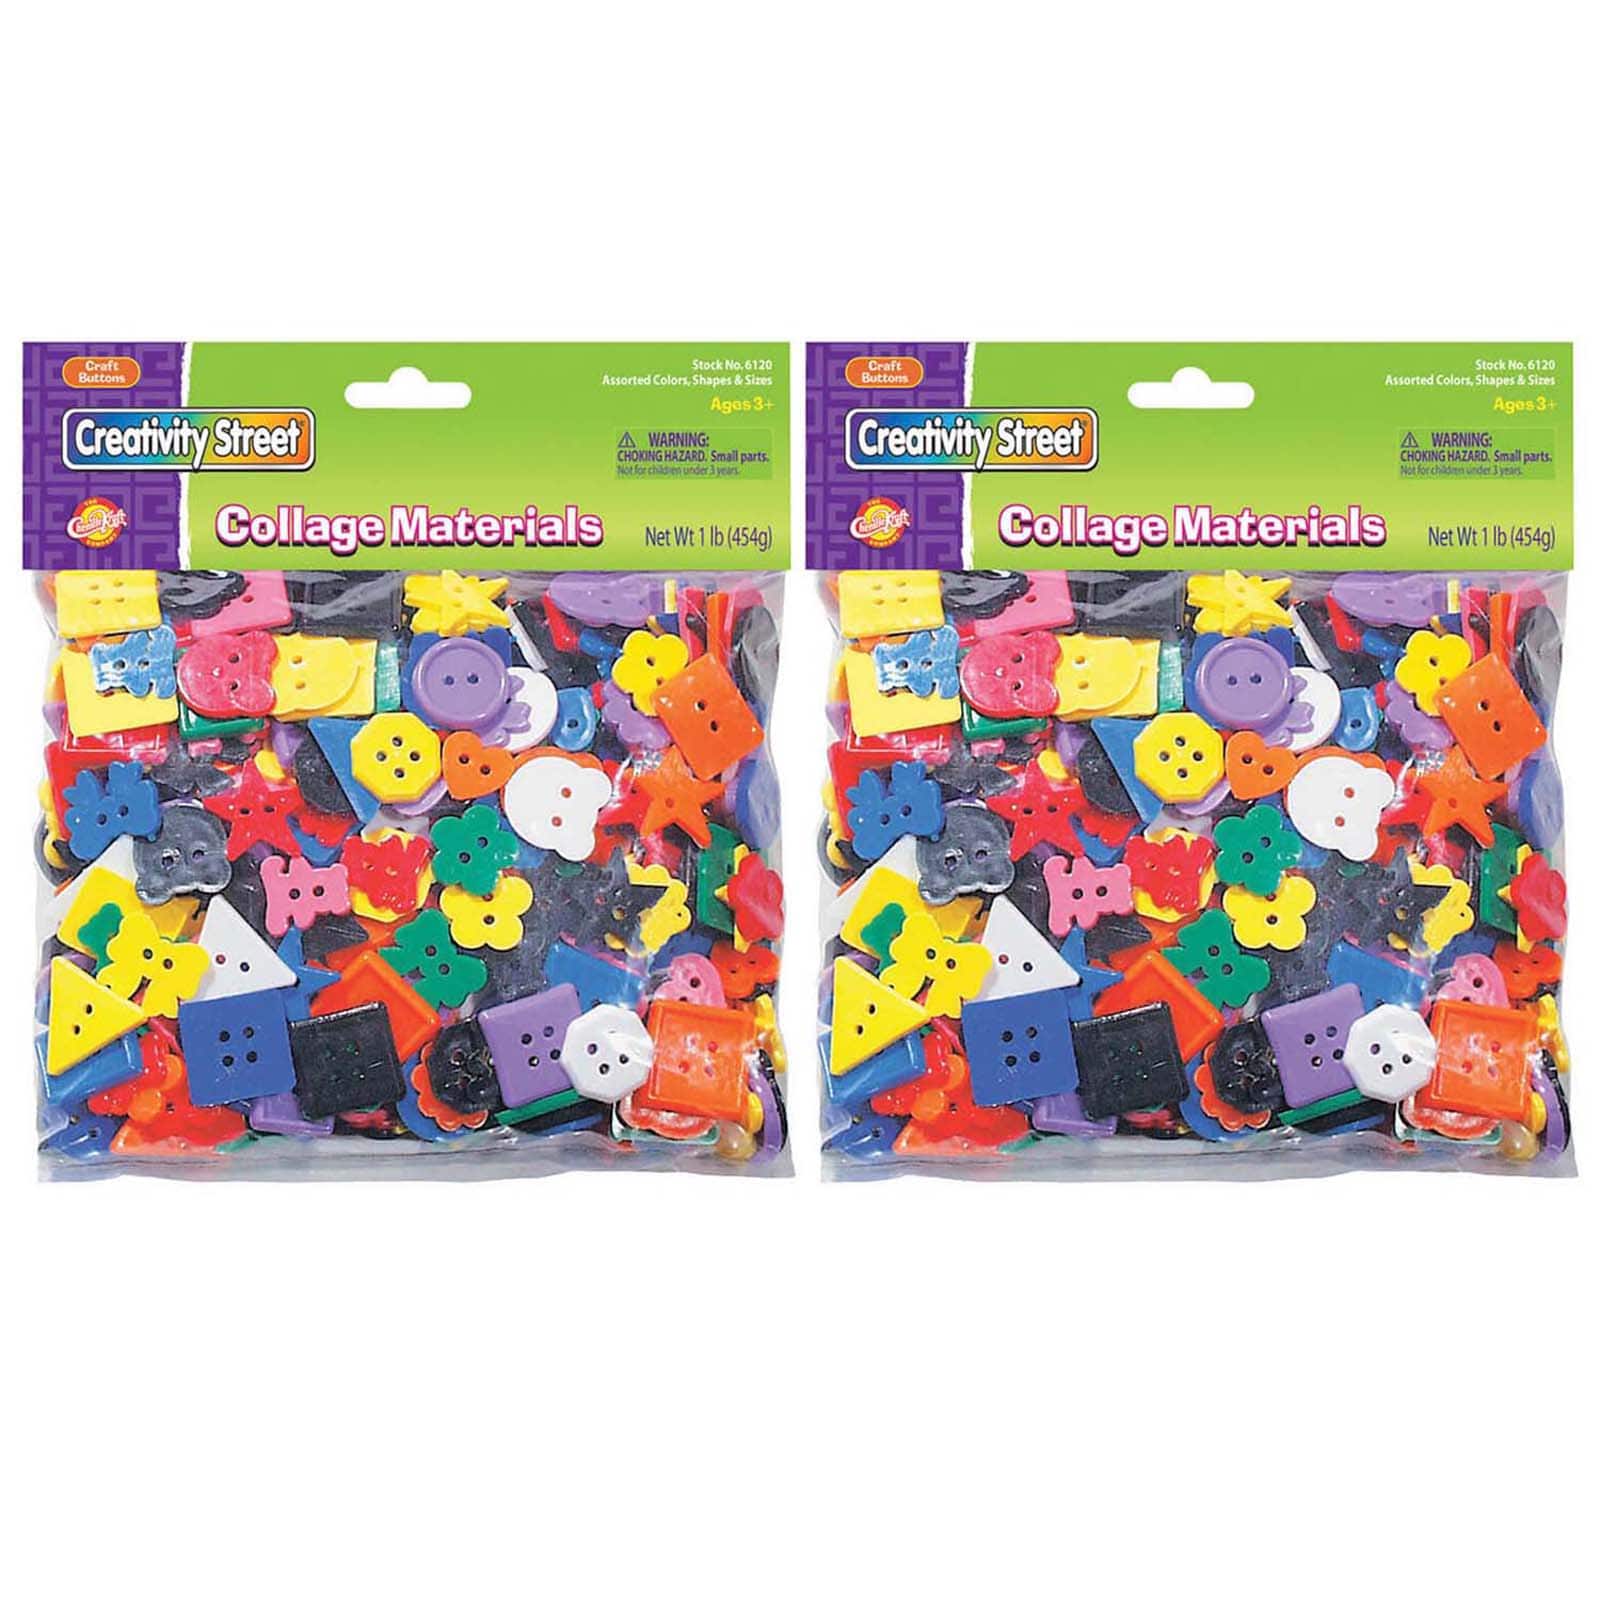 Go Create Multi-Color Plastic Buttons, 3.5 oz. in Assorted Sizes